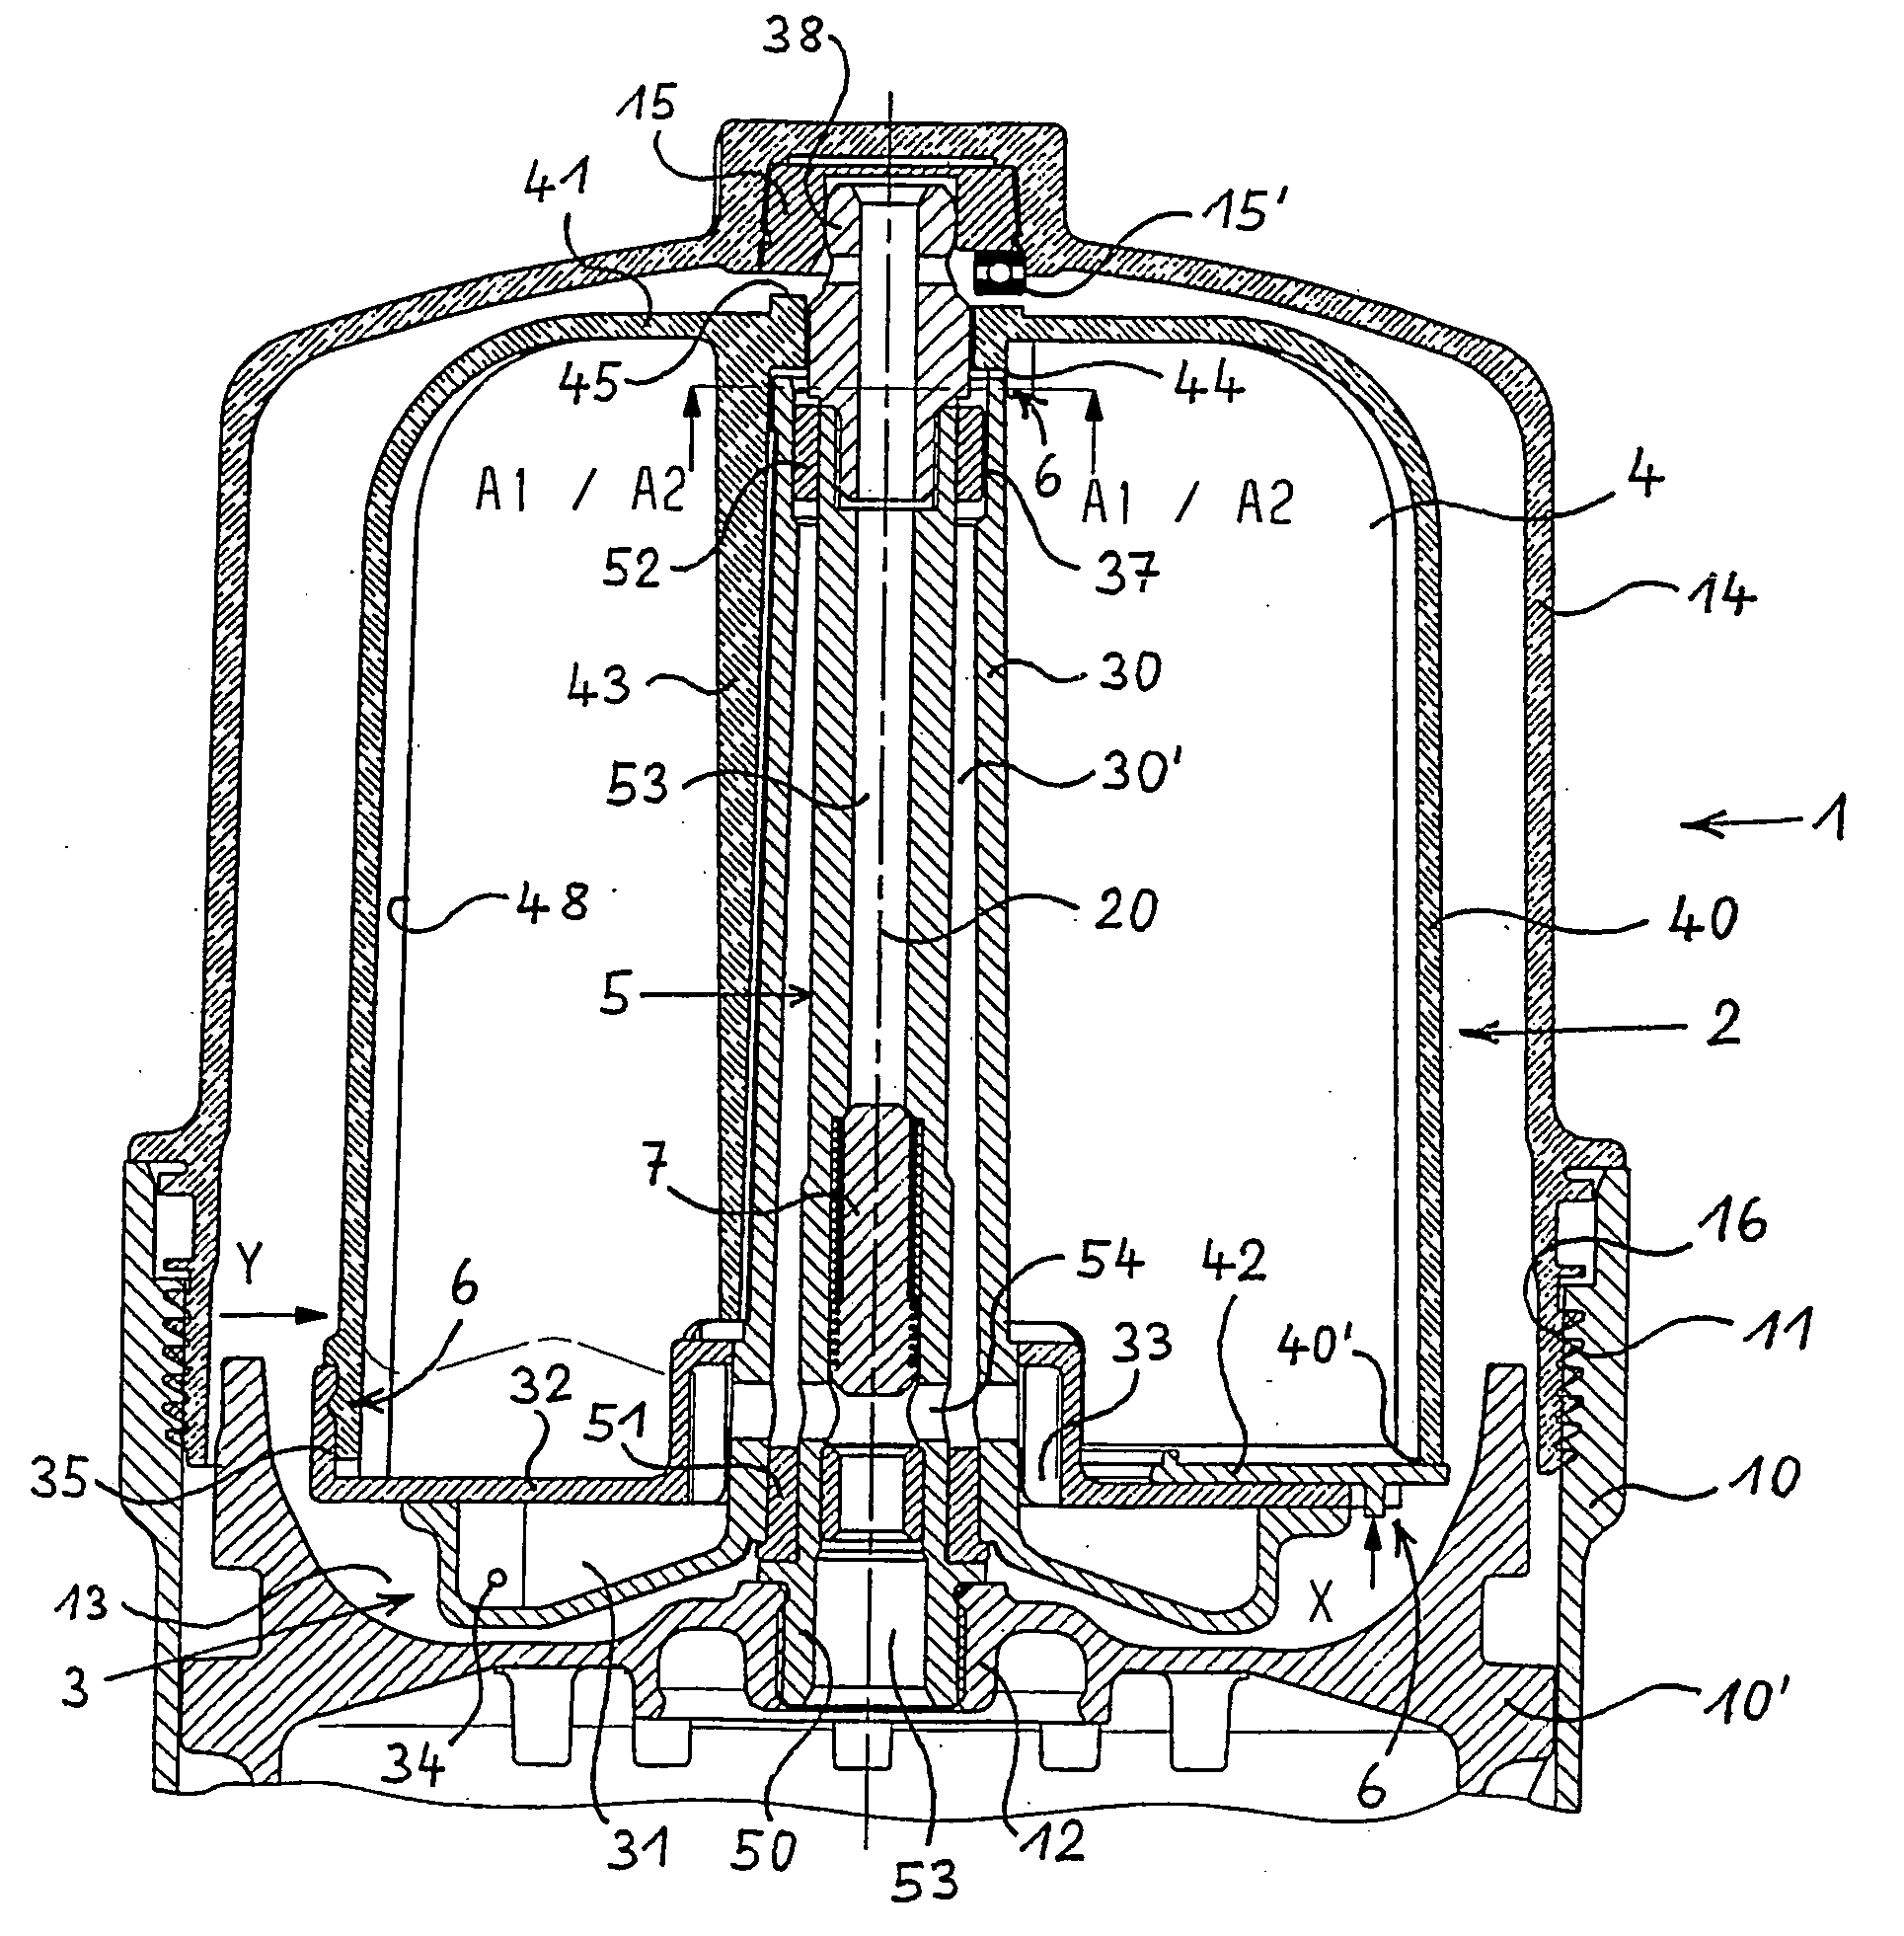 Impulse Centrifuge for the Purification of the Lubricating Oil from an Internal Combustion Engine